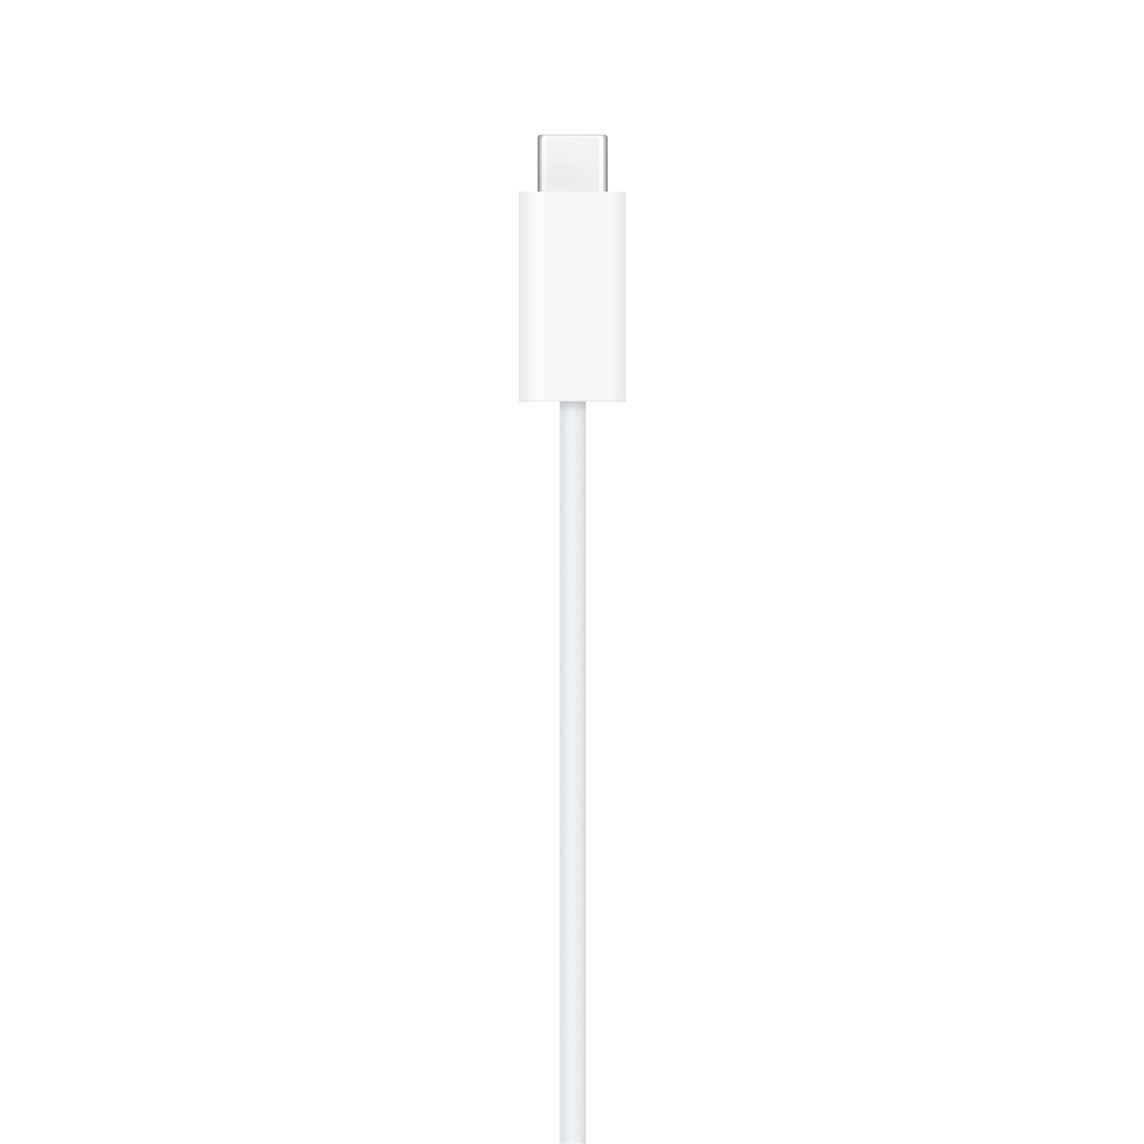 Apple Watch Magnetic Charger USB-C